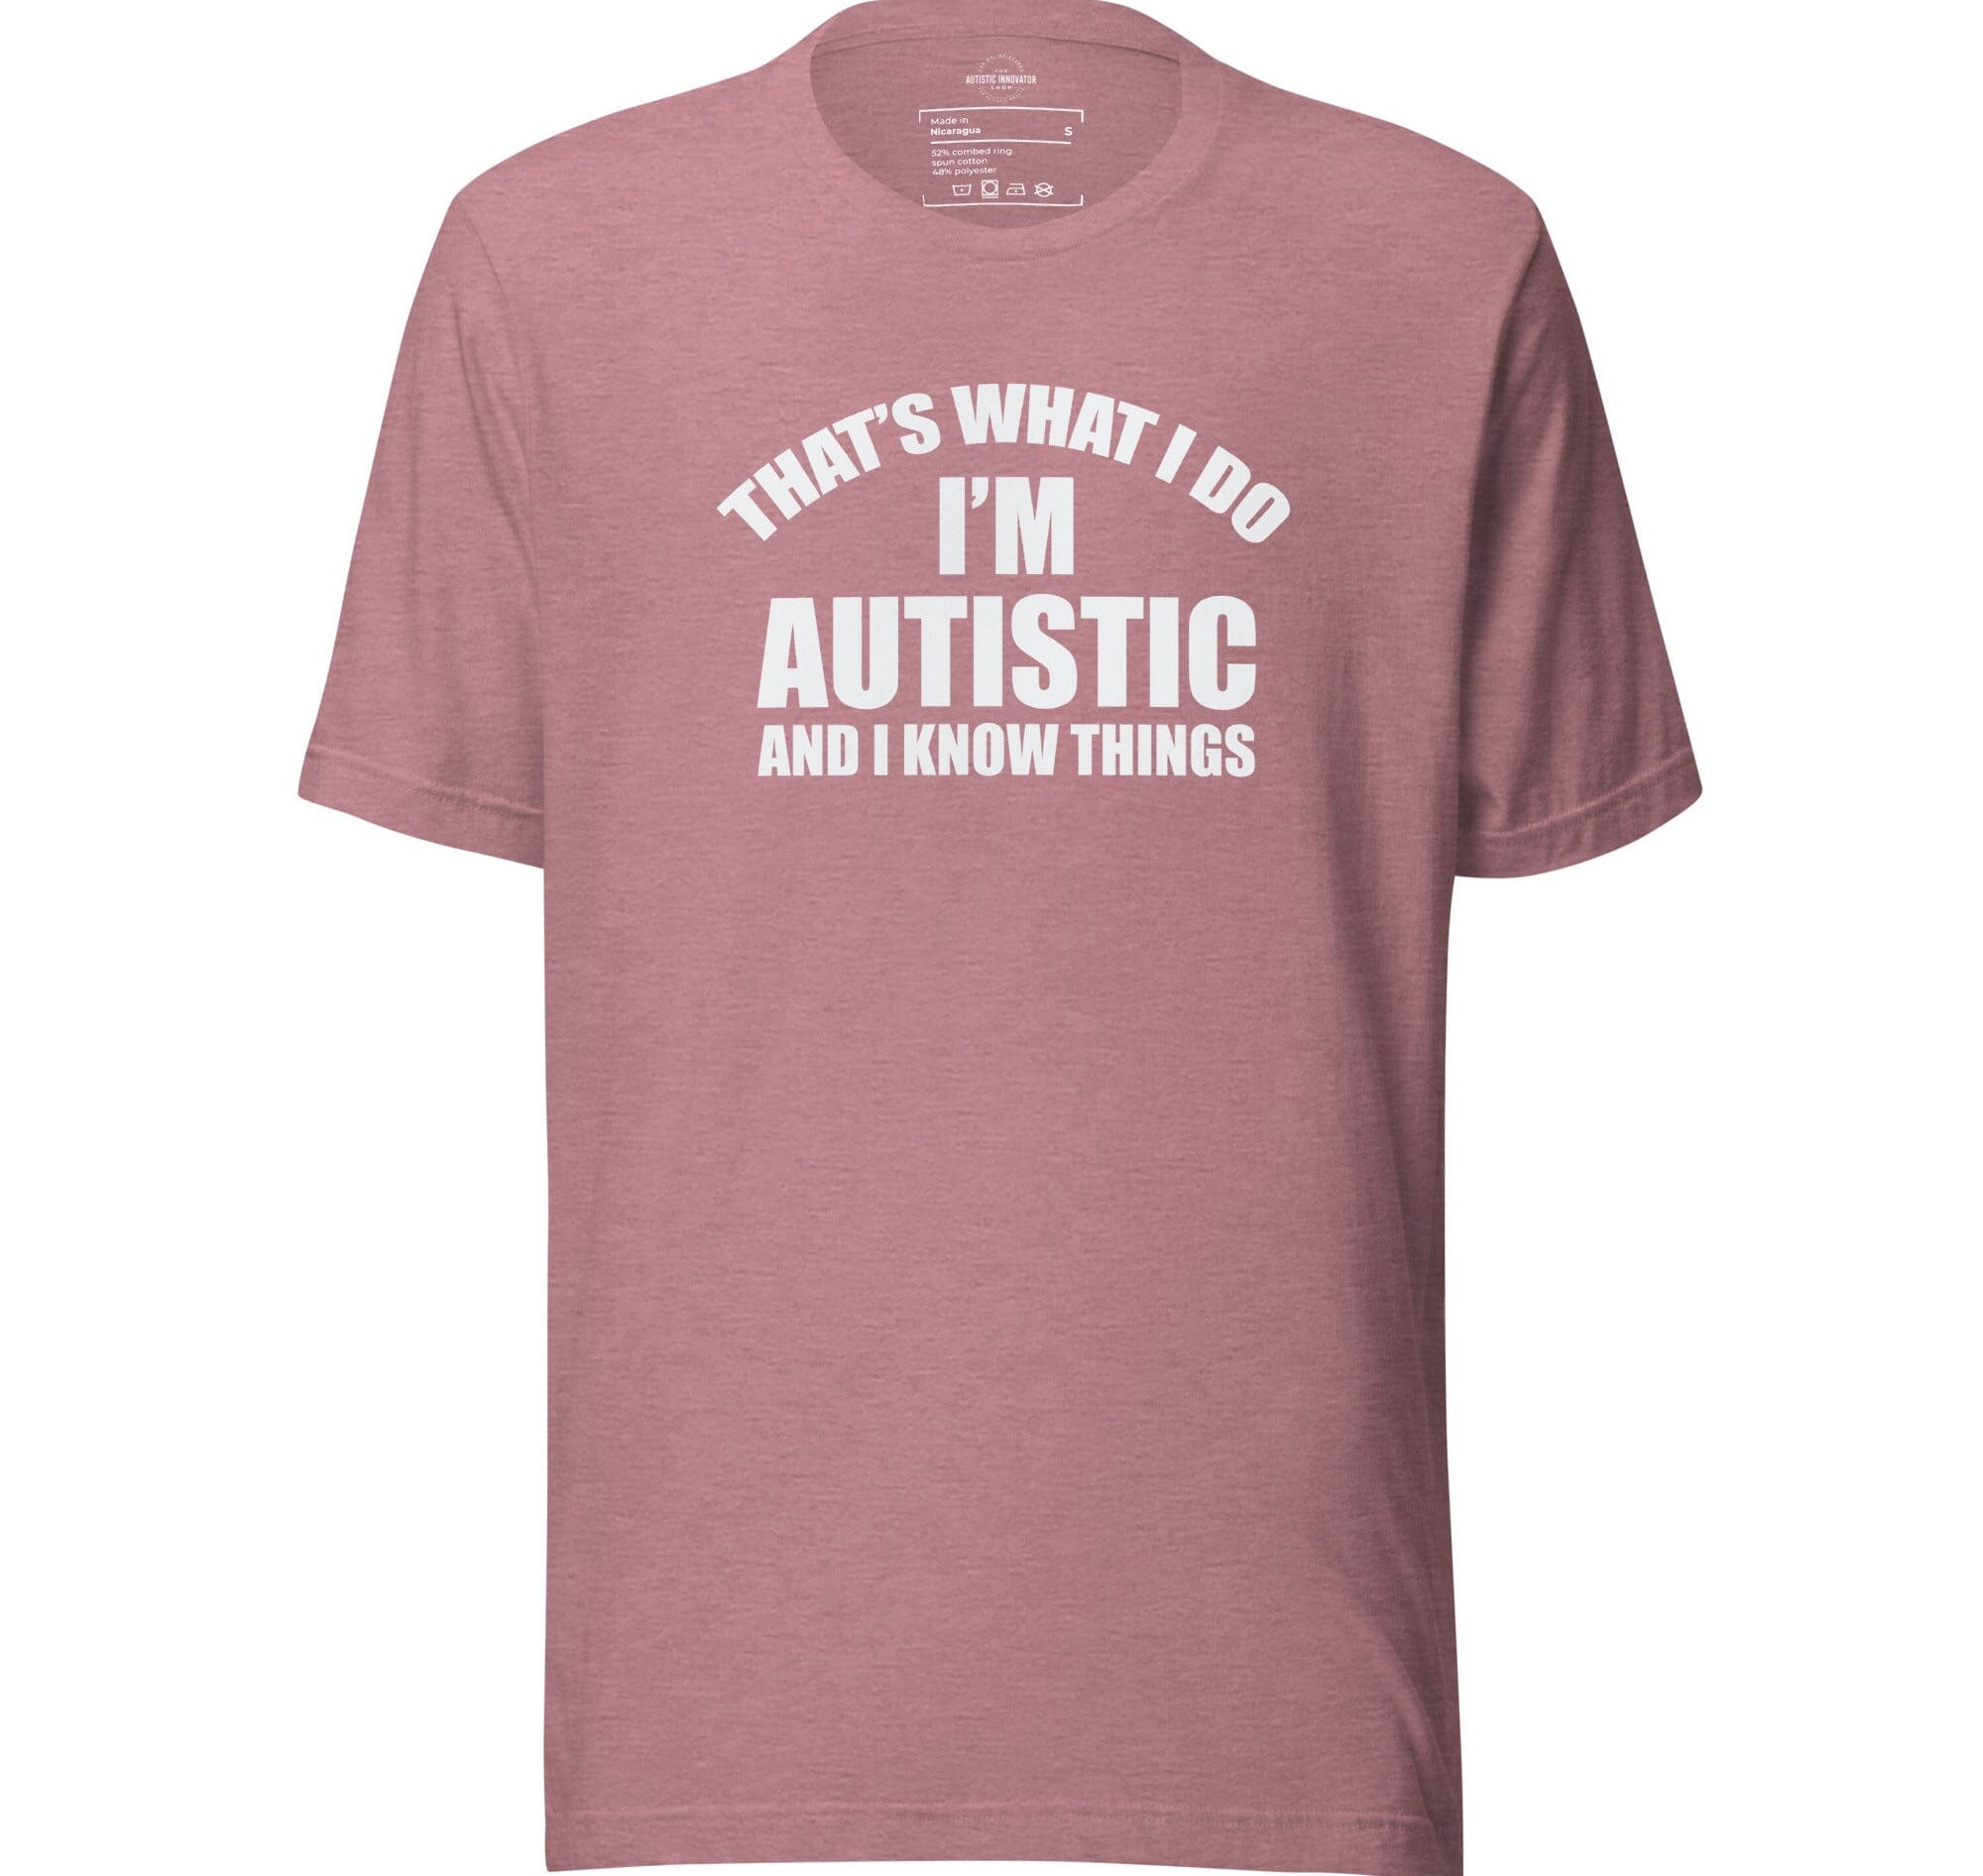 That's What I Do, I'm Autistic and I Know Things Unisex t-shirt The Autistic Innovator Heather Orchid S 